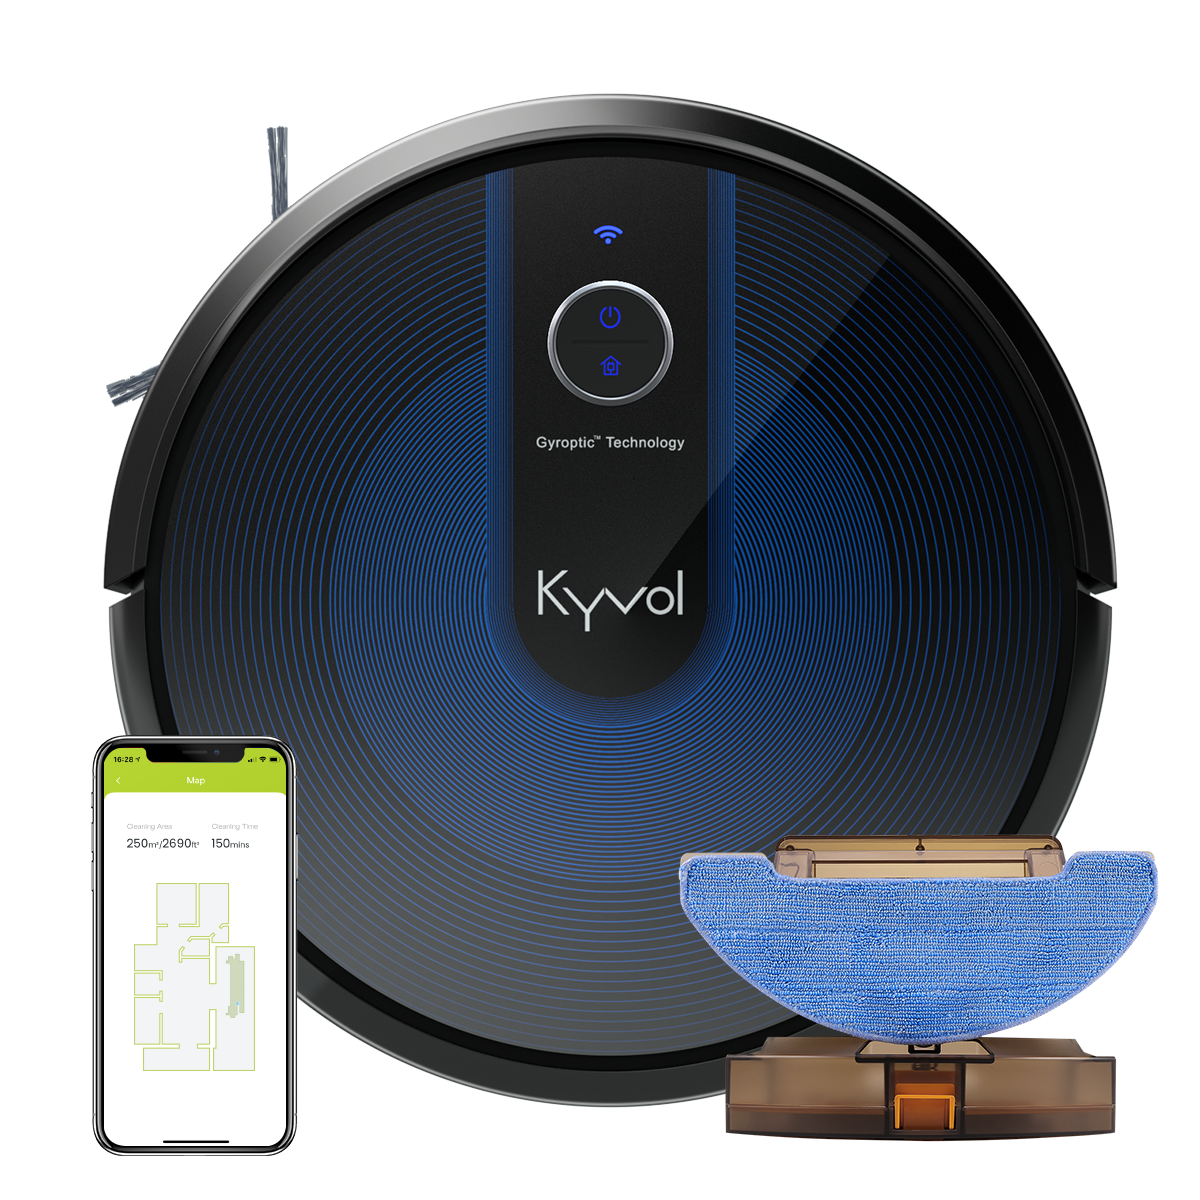 Kyvol Cybovac E31 Robot Vacuum, Sweeping & Mopping Robot Vacuum Cleaner with 2200Pa Suction, Smart Navigation, 150 mins Runtime, Works with Alexa, Self-Charging, Ideal for Pet Hair, Floor and Carpets - image 1 of 10